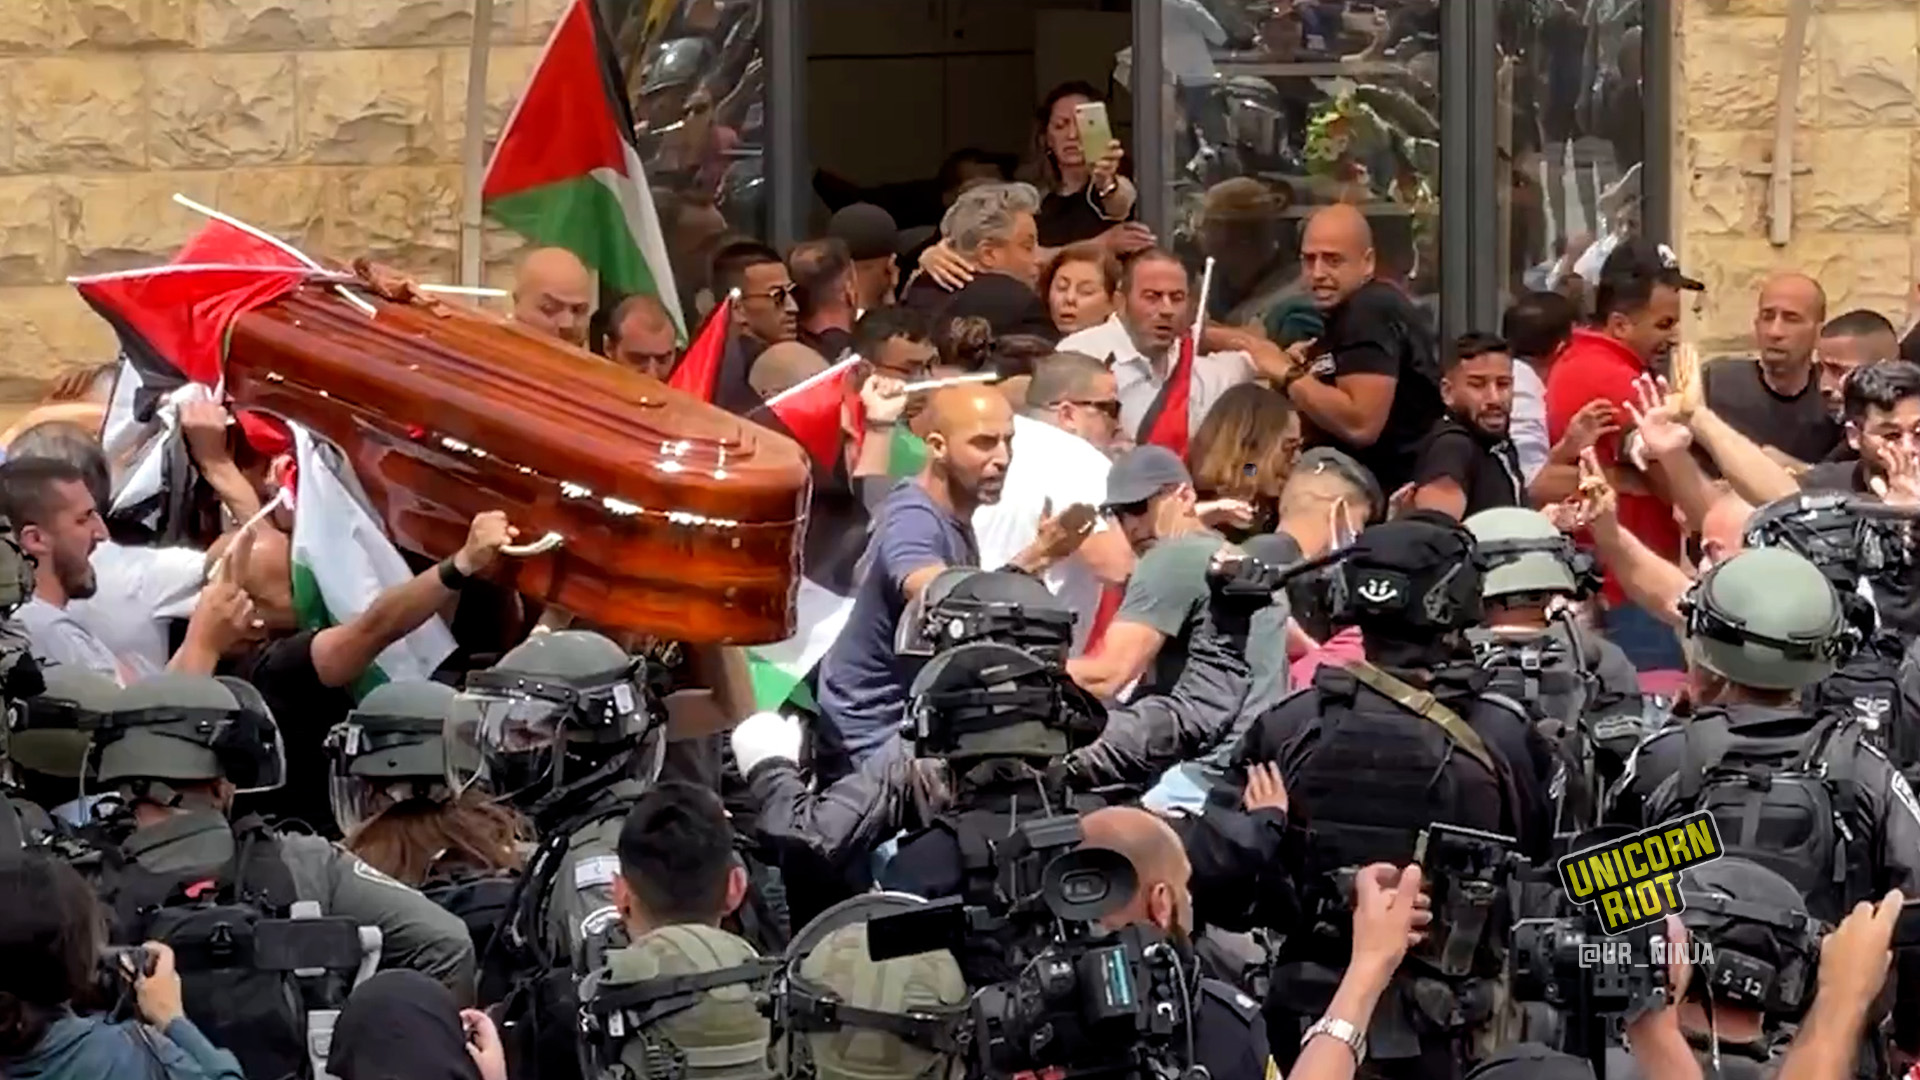 Israeli Police Attack Funeral Procession of Palestinian-American Journalist They Killed - UNICORN RIOT